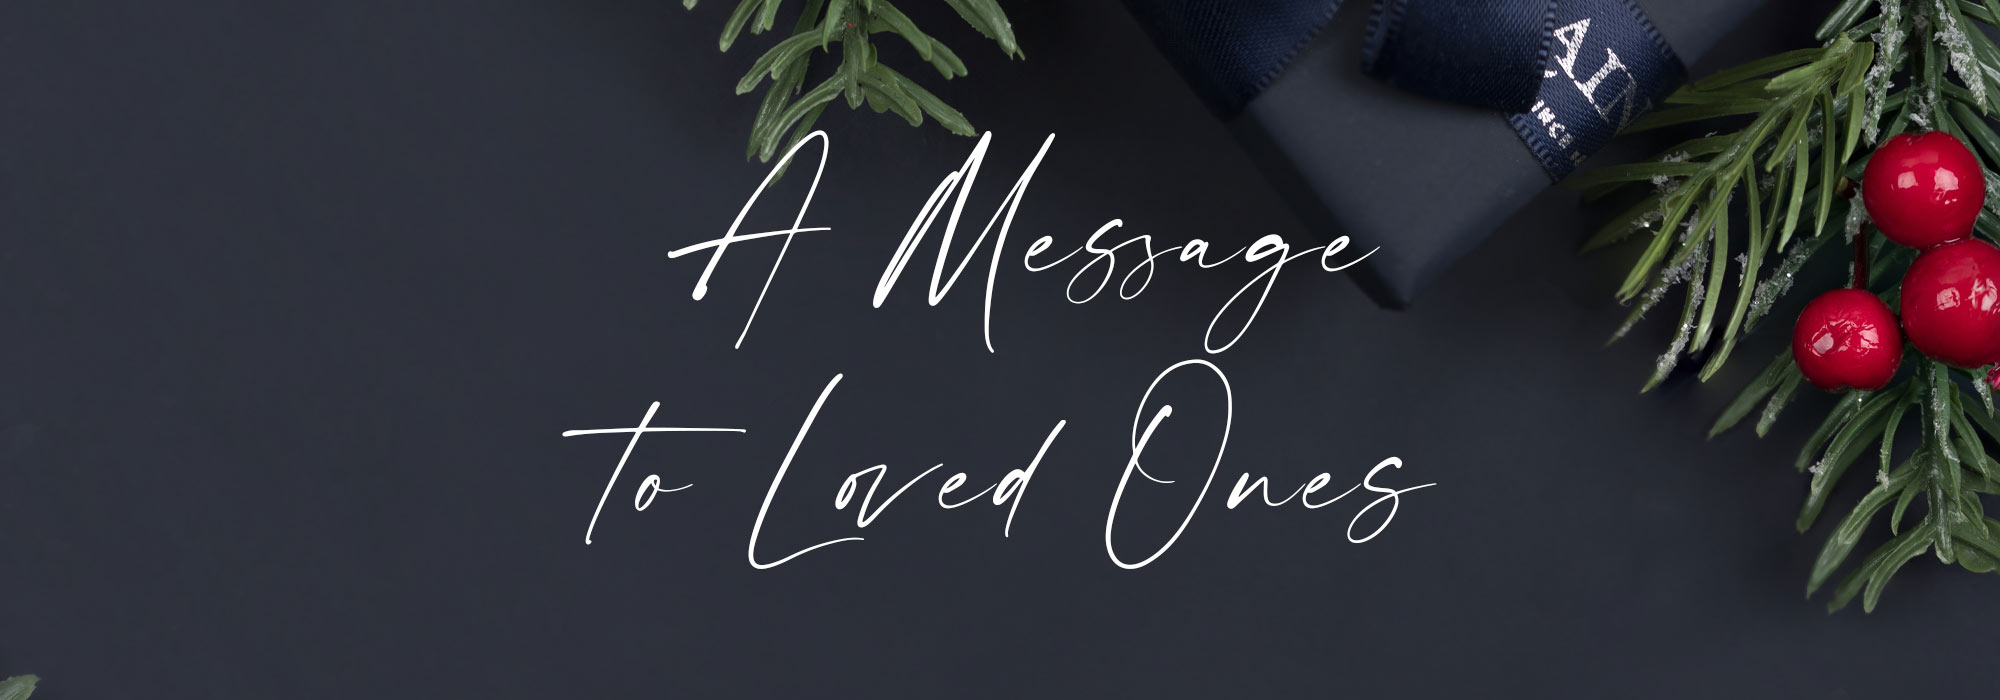 message-to-loved-ones